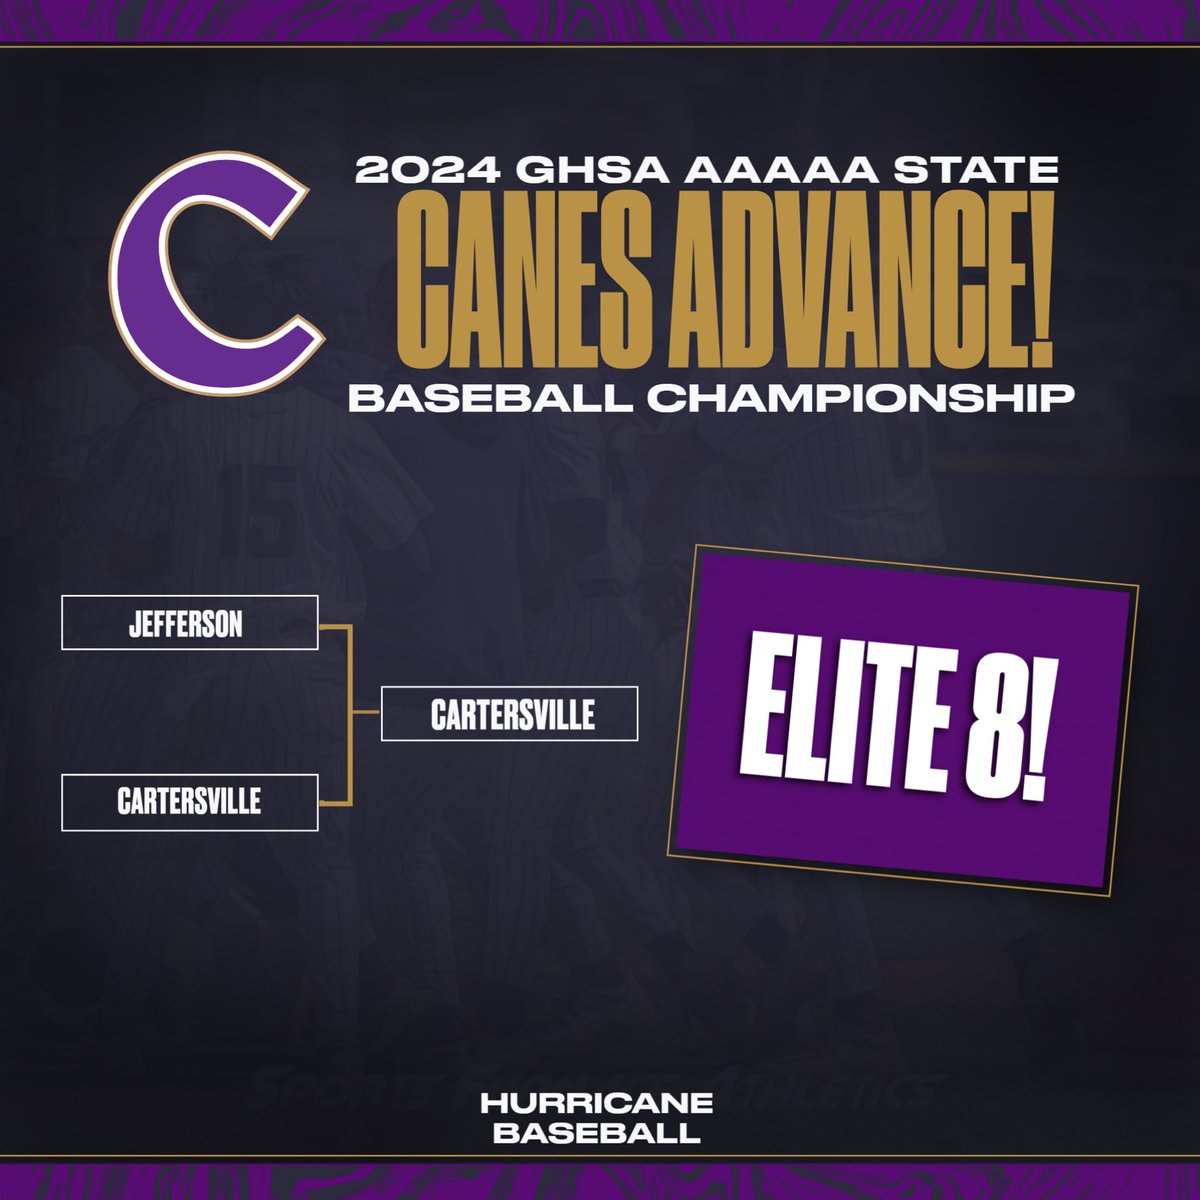 Canes ADVANCE! Cartersville completed a 2-game sweep of Jefferson with a 10-1 win. The Canes have now advanced to the State Quarterfinals 25 times in the past 28 seasons.